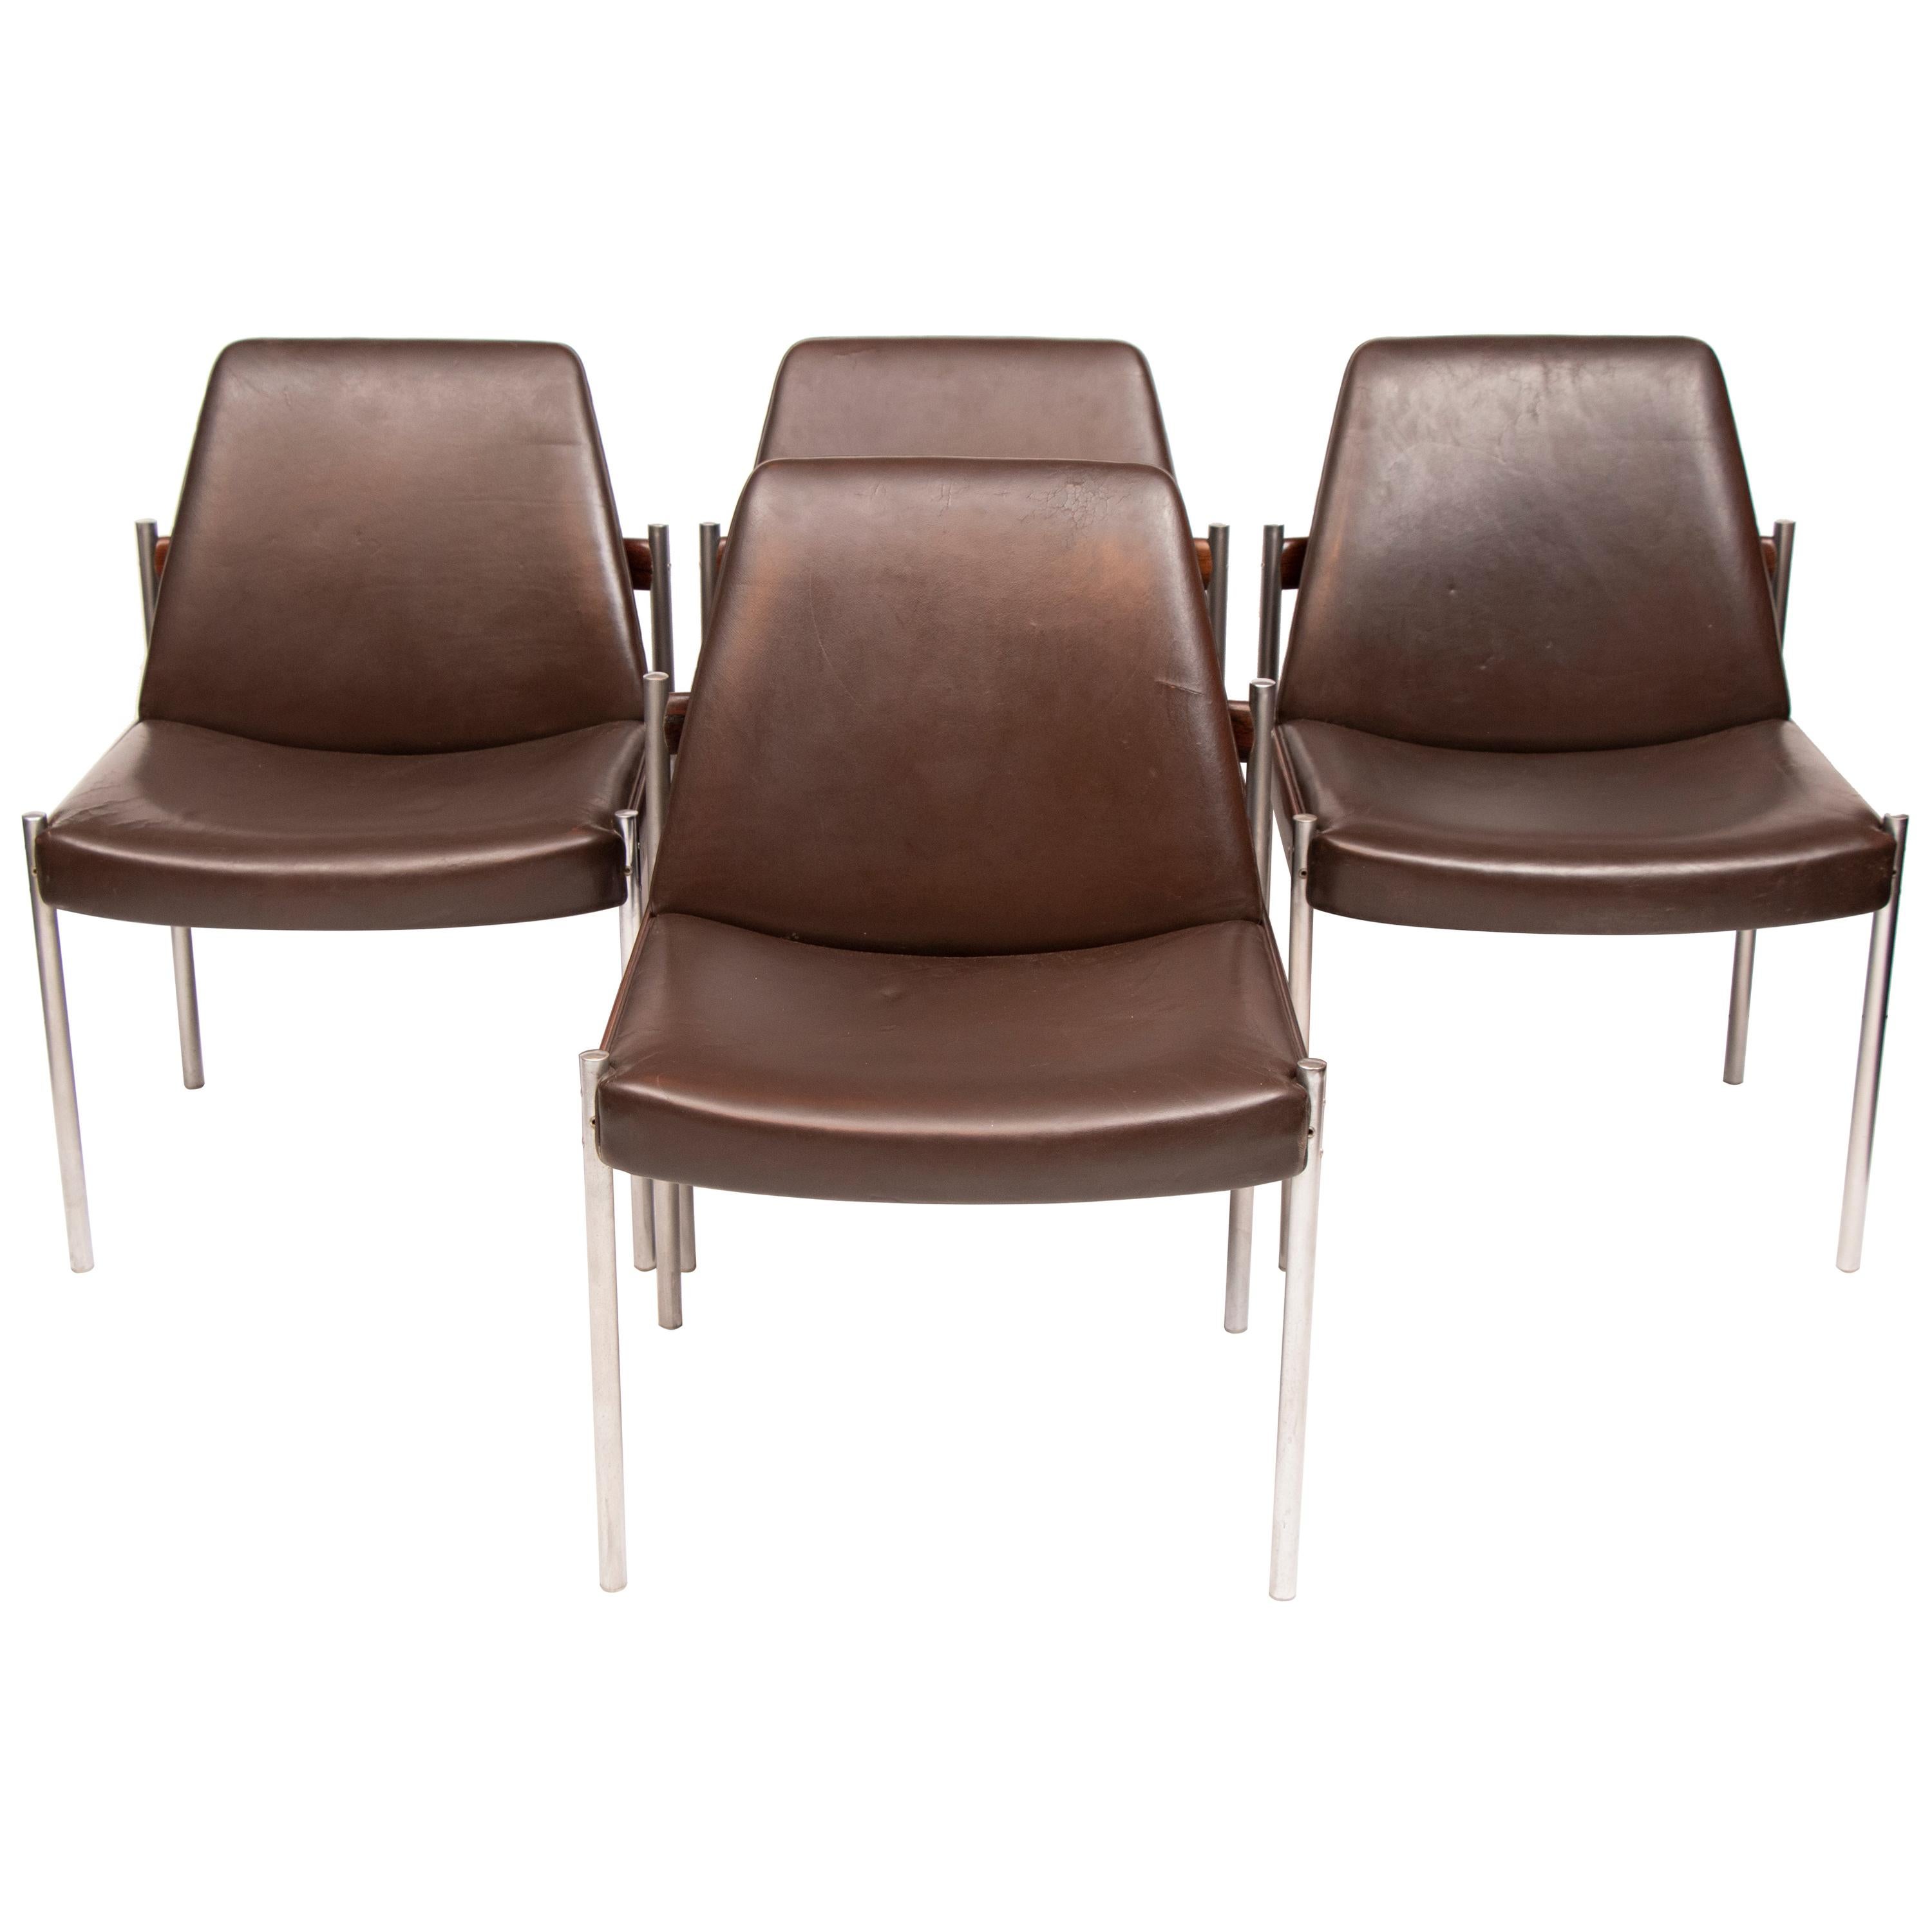 Set of 4 1960s Dining Conference Chairs by Sven Ivar Dysthe for Dokka Mobler